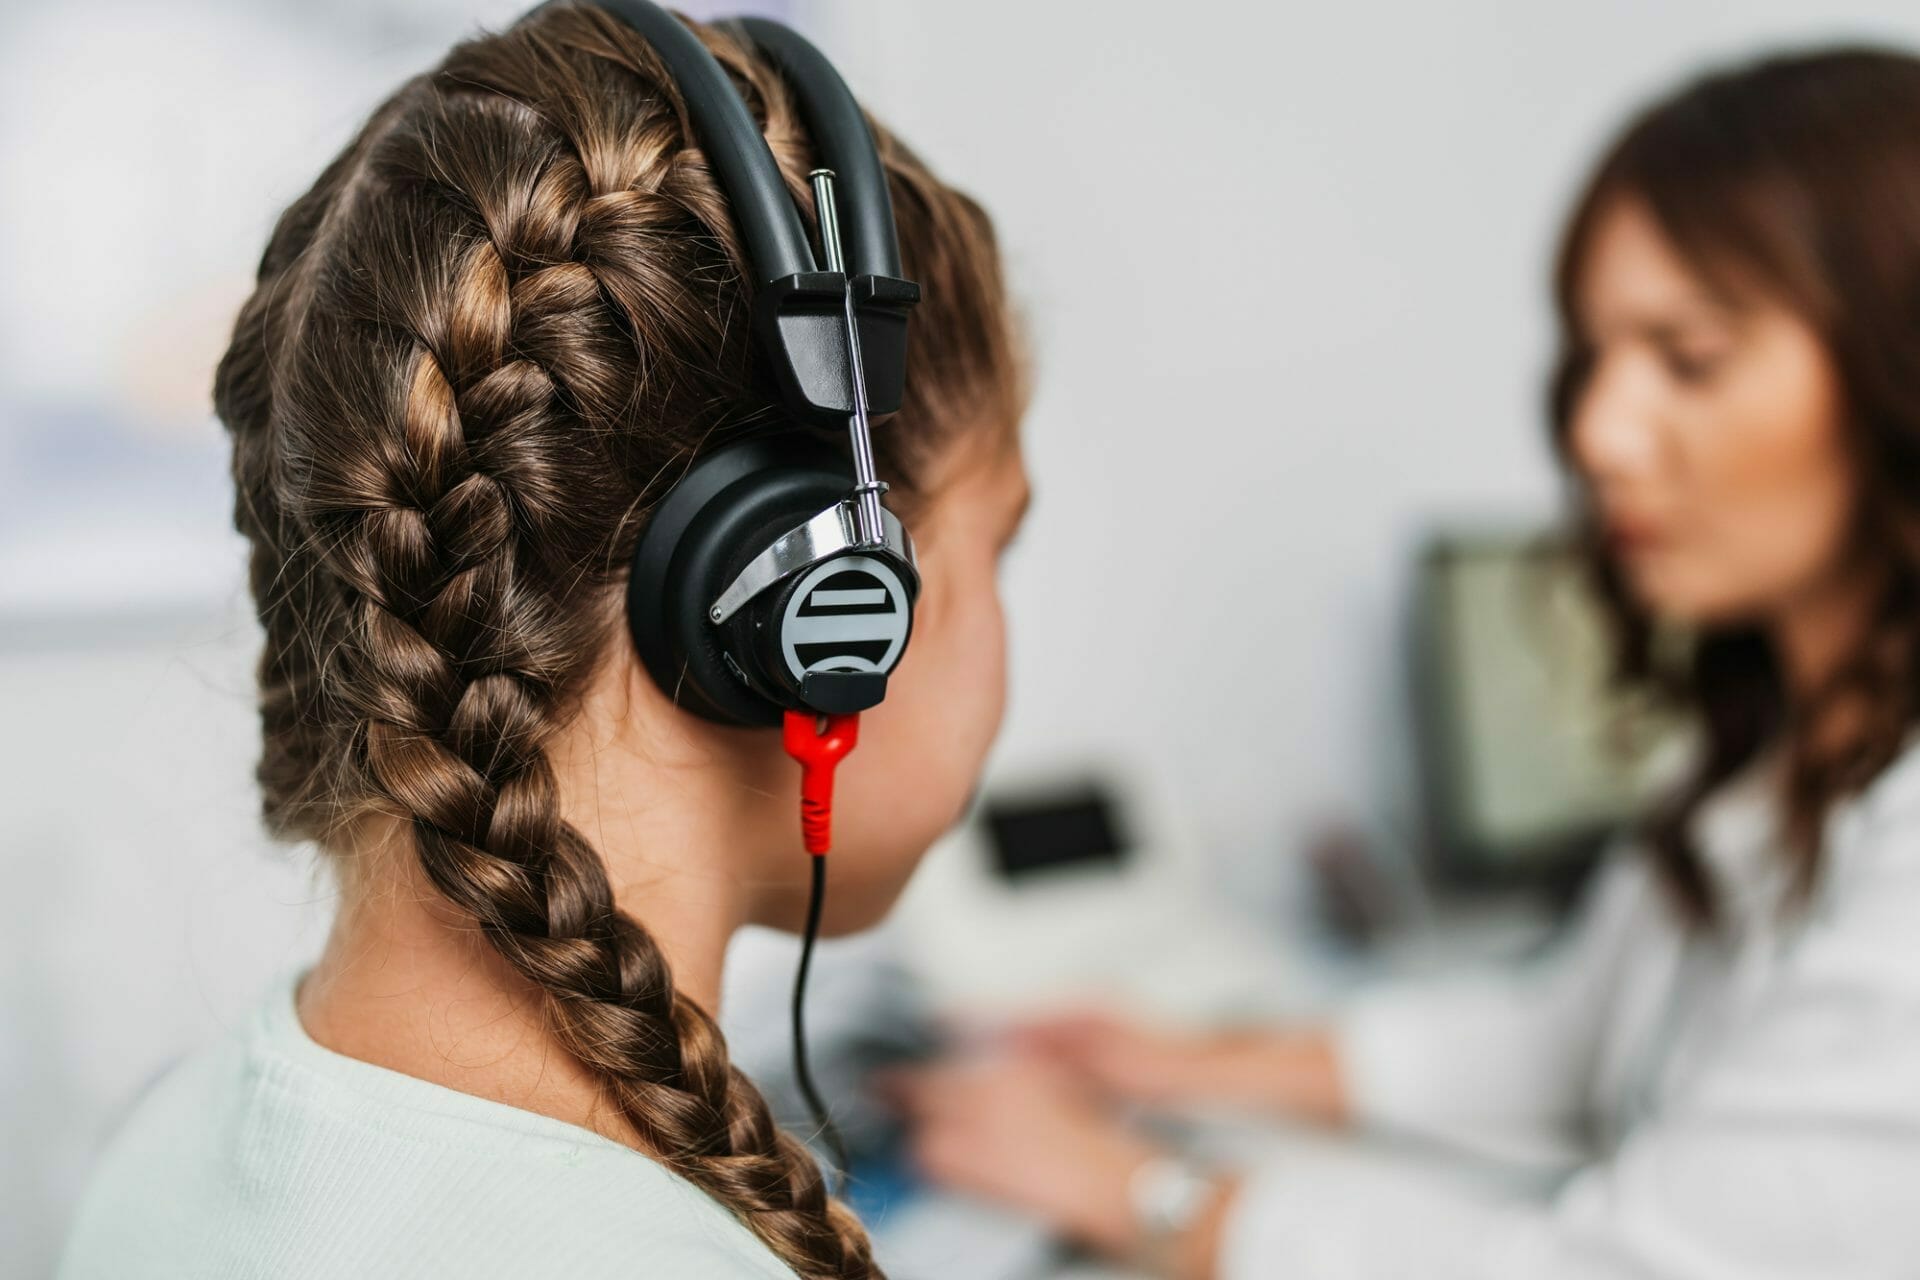 A young girl wearing headphones in a doctor's office.